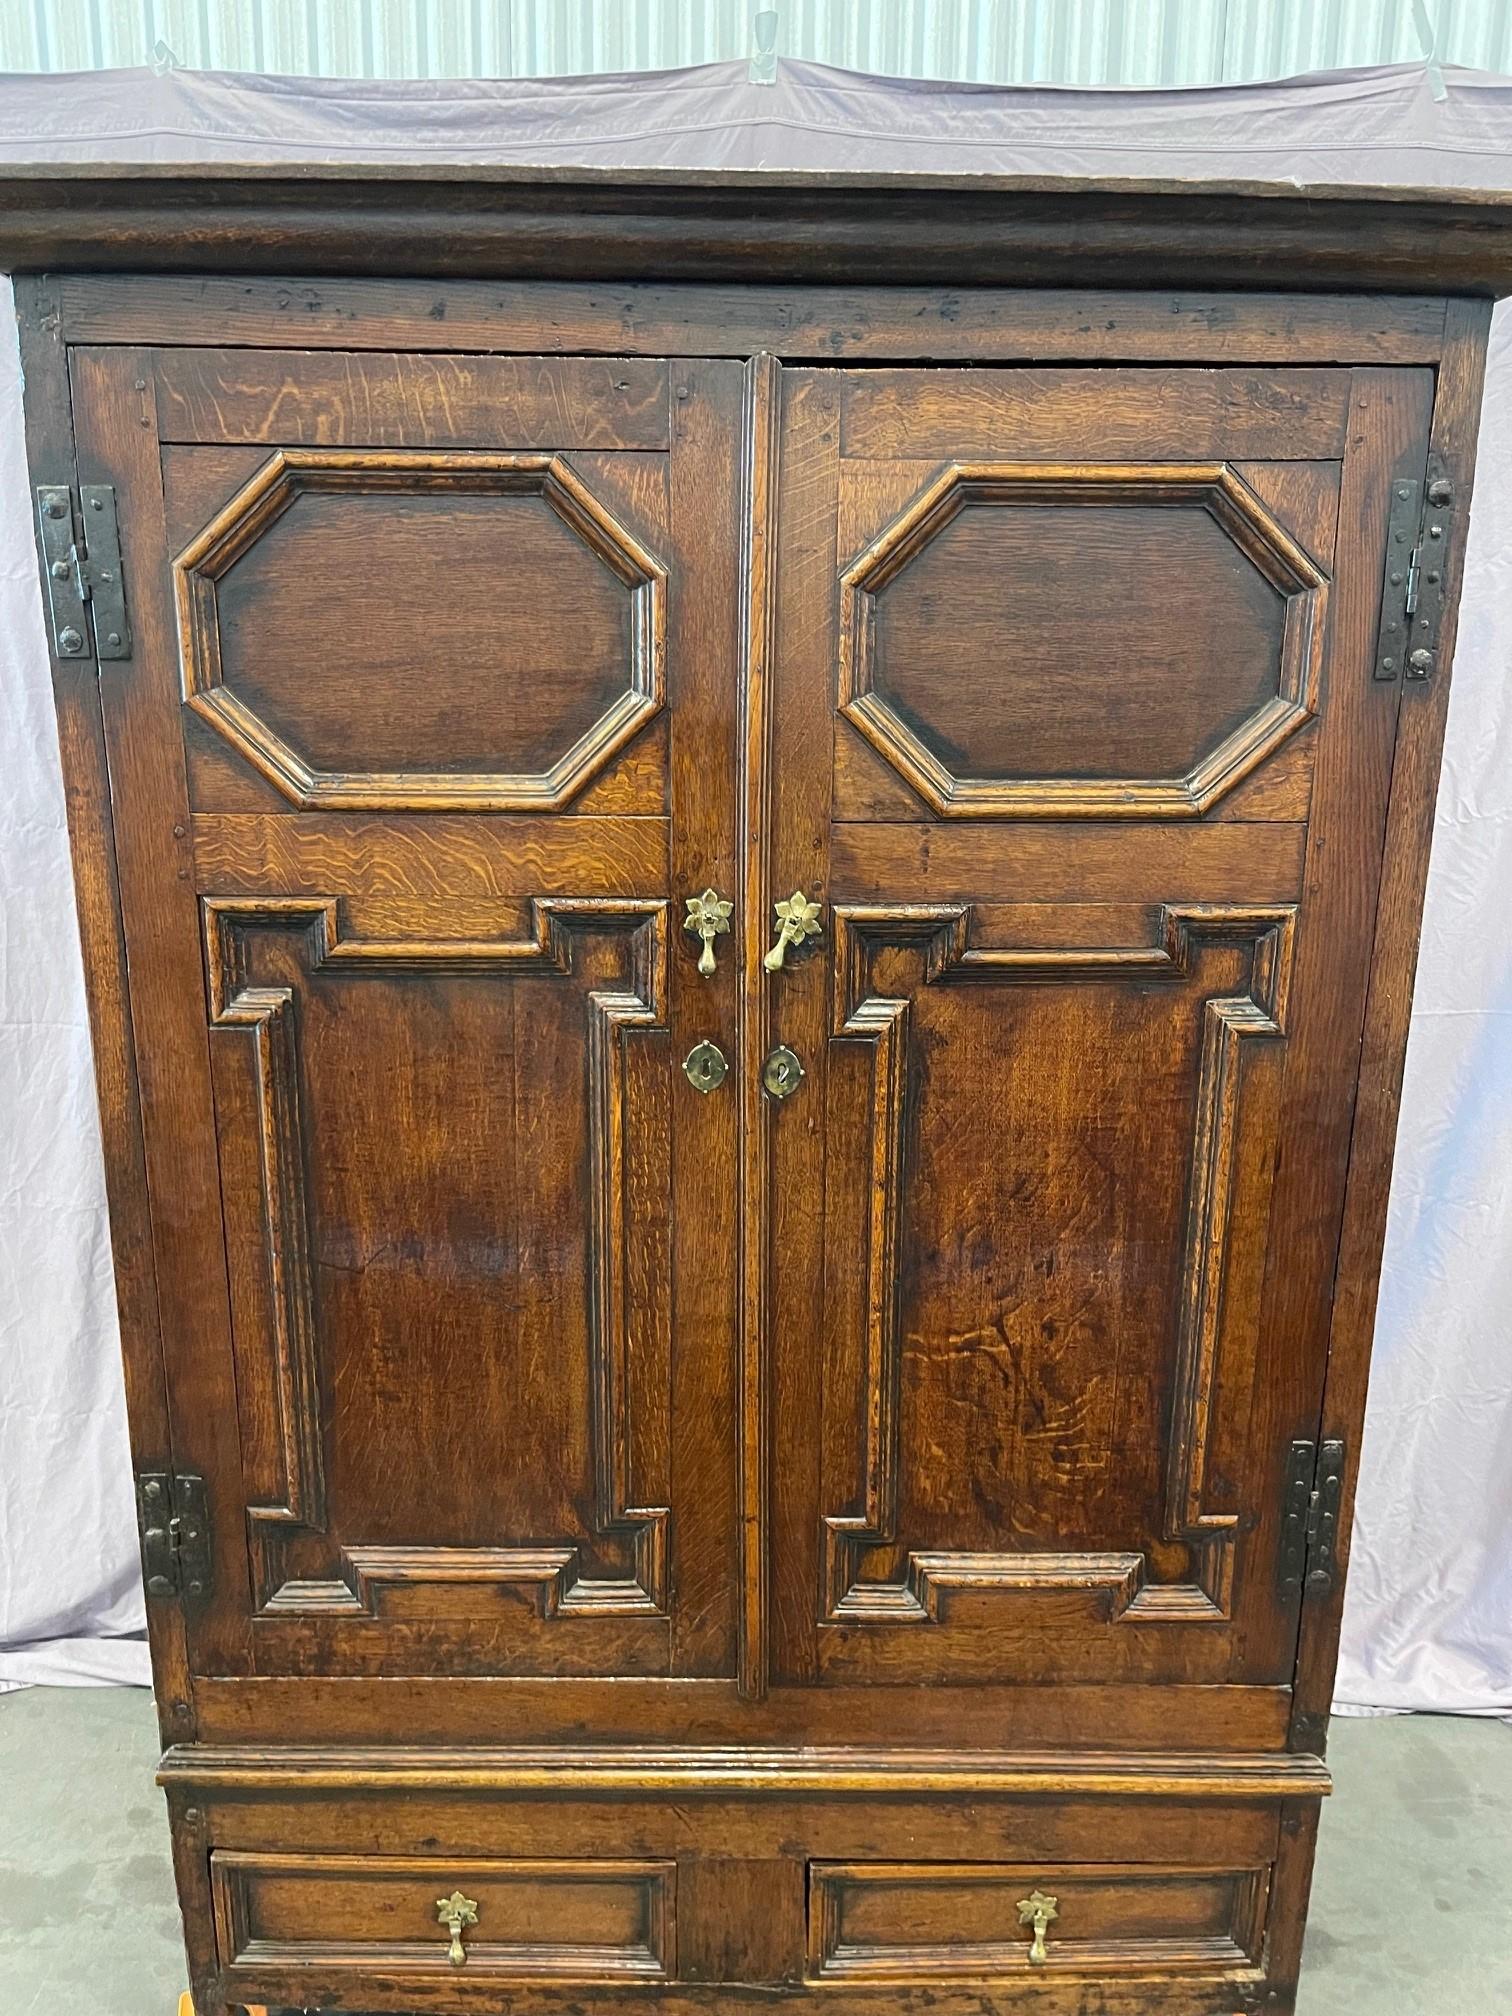 A splendid example of a 18th Century Georgian oak cupboard from around 1760. The exterior shell is genuine and untouched, with the interior have some modifications and improvements added through the years. The right side door opens to a compartment